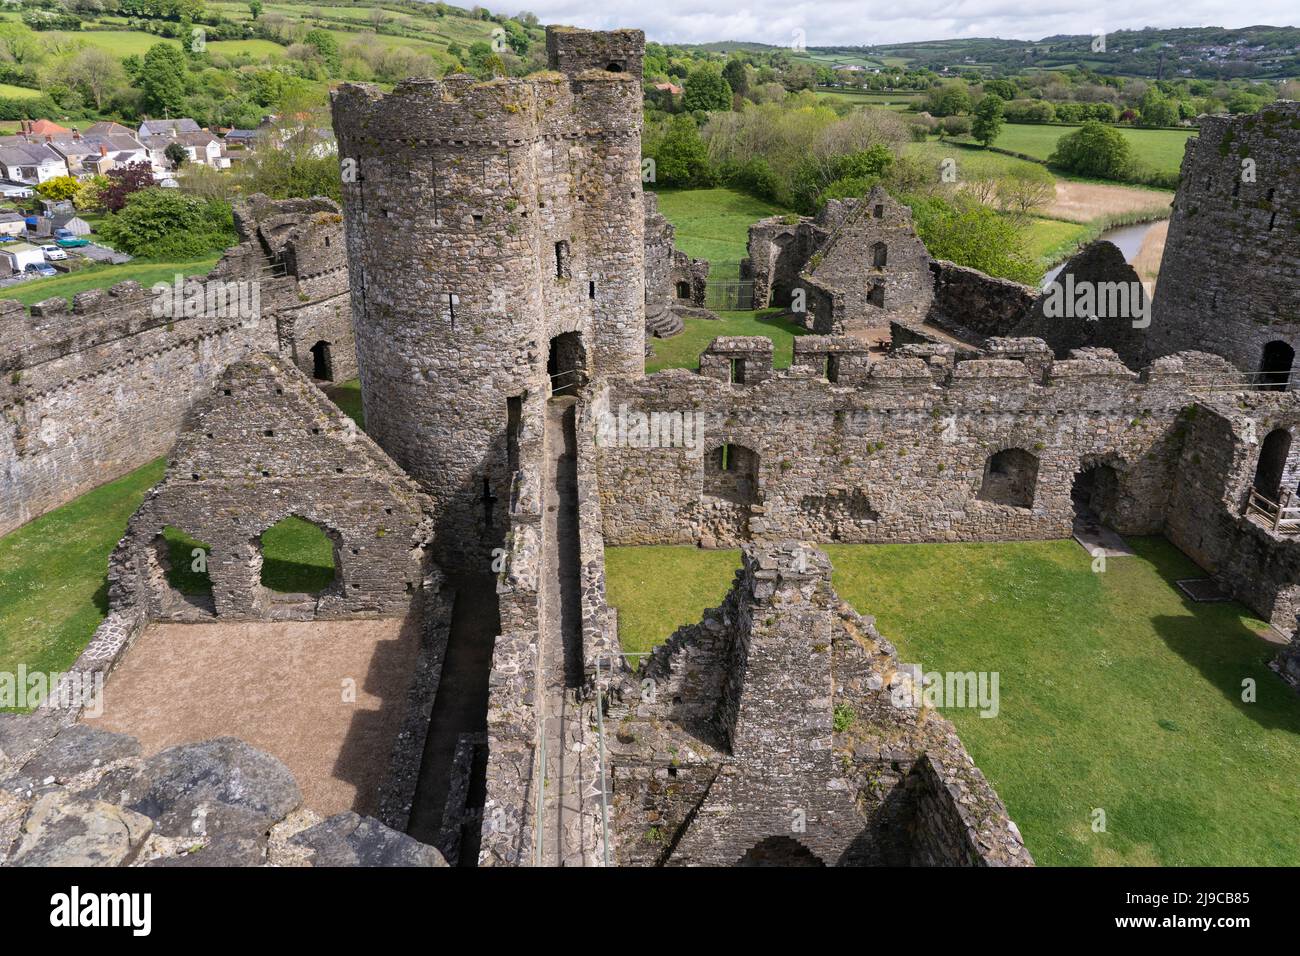 An aerial view of Kidwelly Castle, looking down on the Later Hall, Keep, Inner Ward, Keep and Outer Walls on a spring May day. Carmarthen, Wales, UK Stock Photo